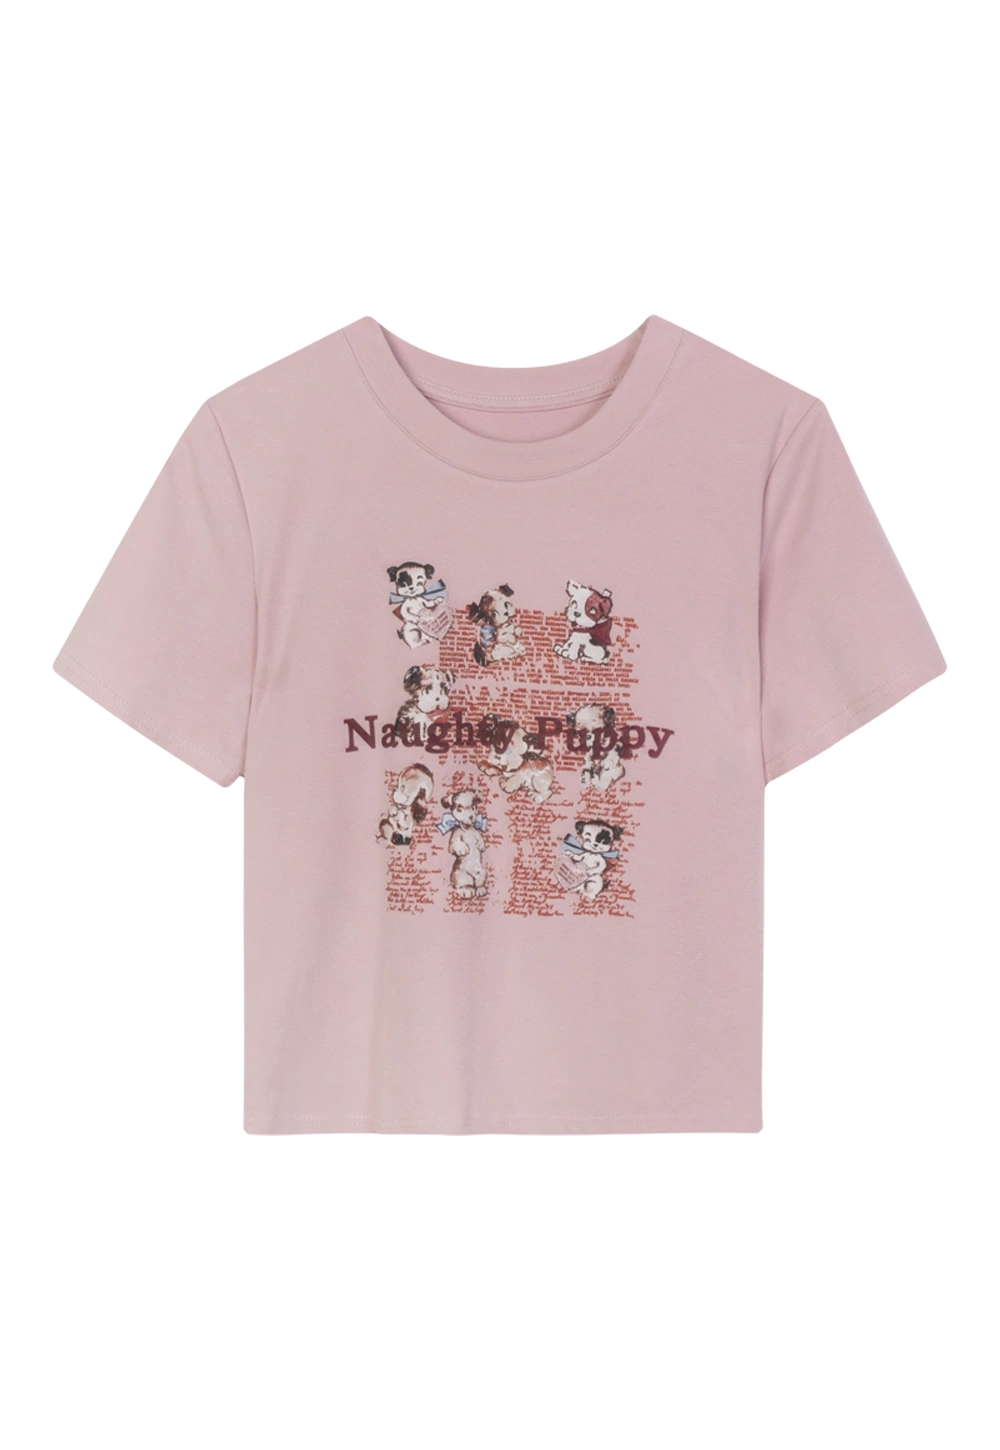 Women's White T-Shirt with Playful Puppy Print - Casual Fashion